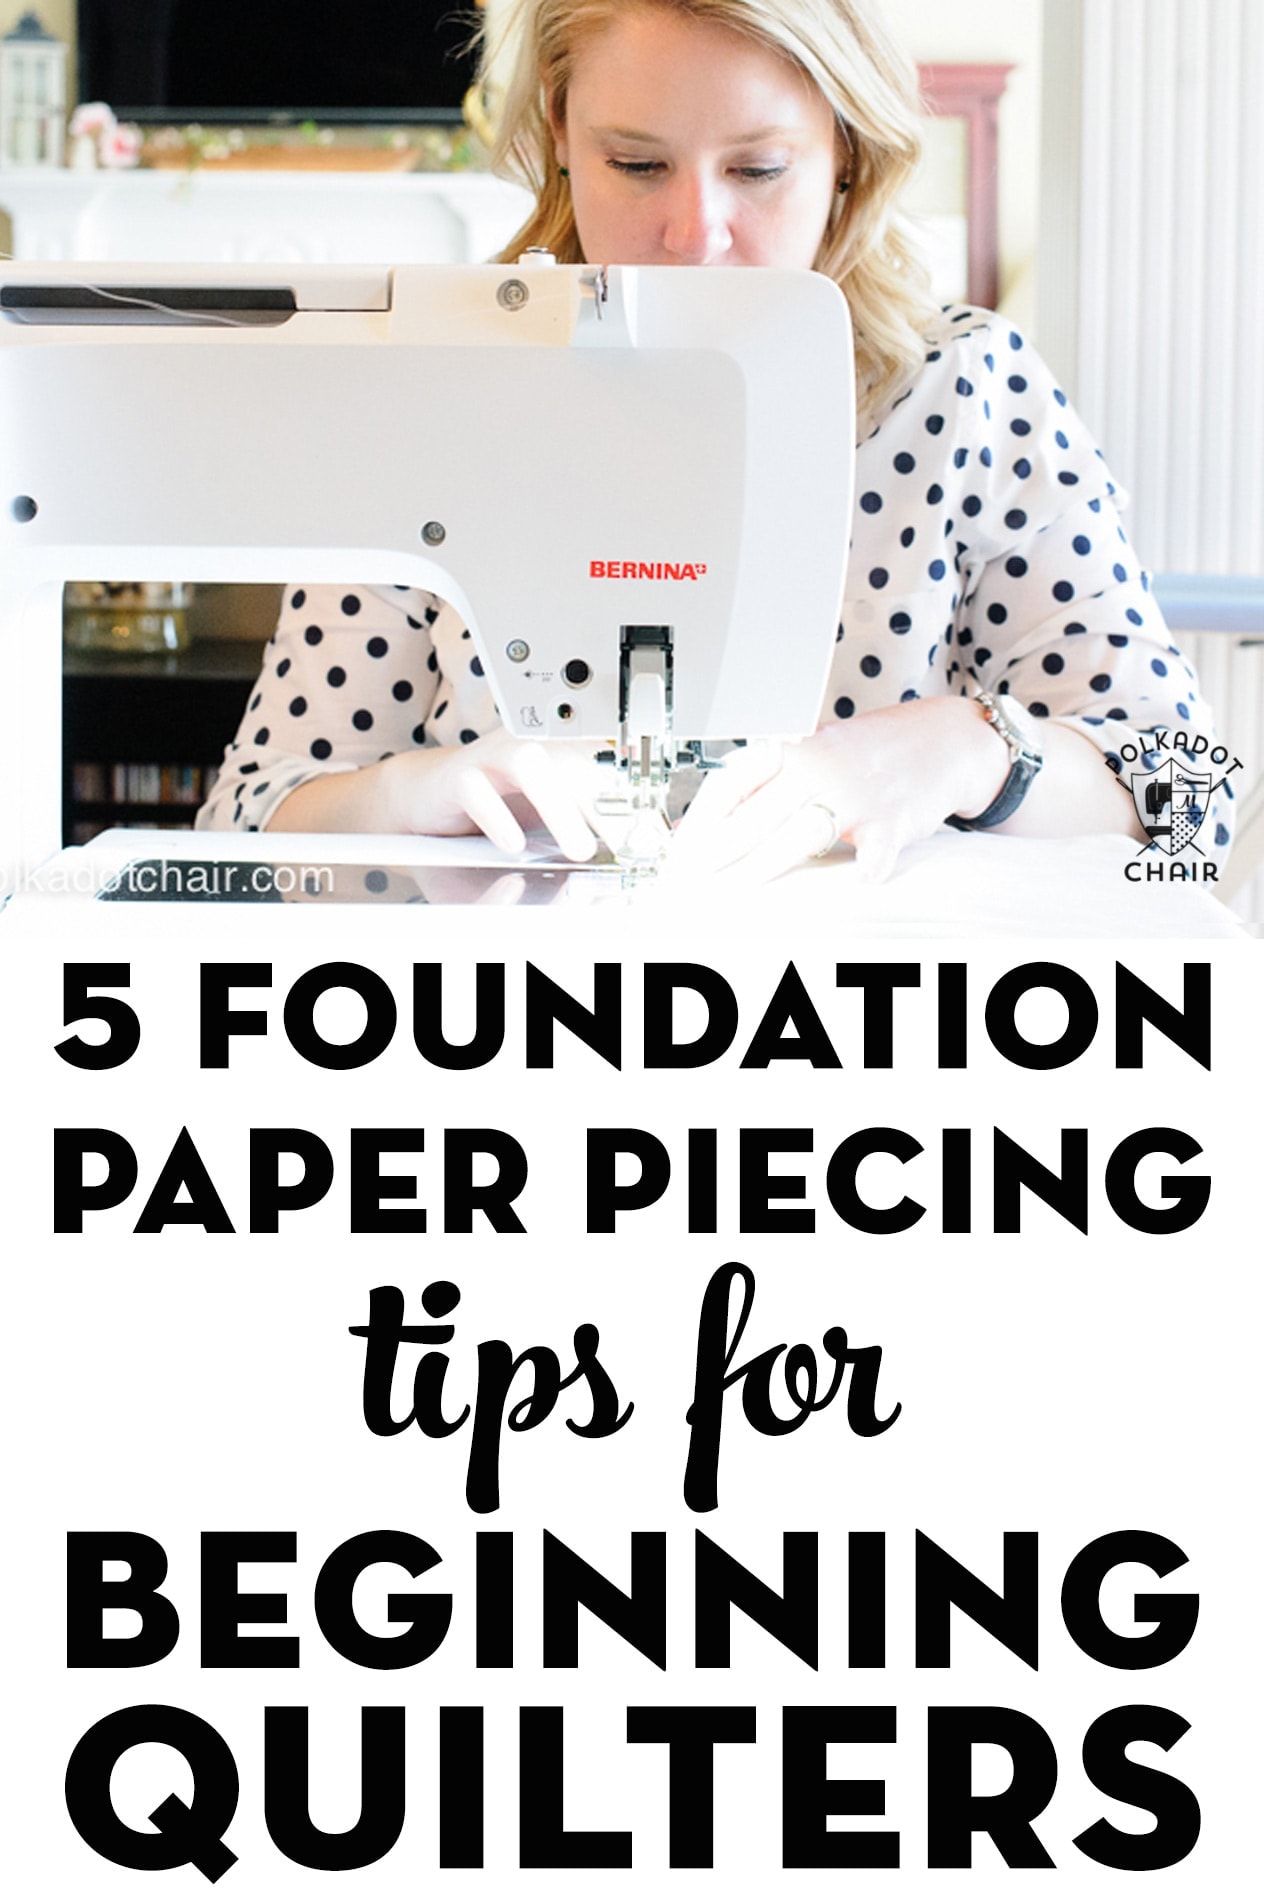 5 Foundation Paper Piecing Tips Perfect for Beginning Quilters